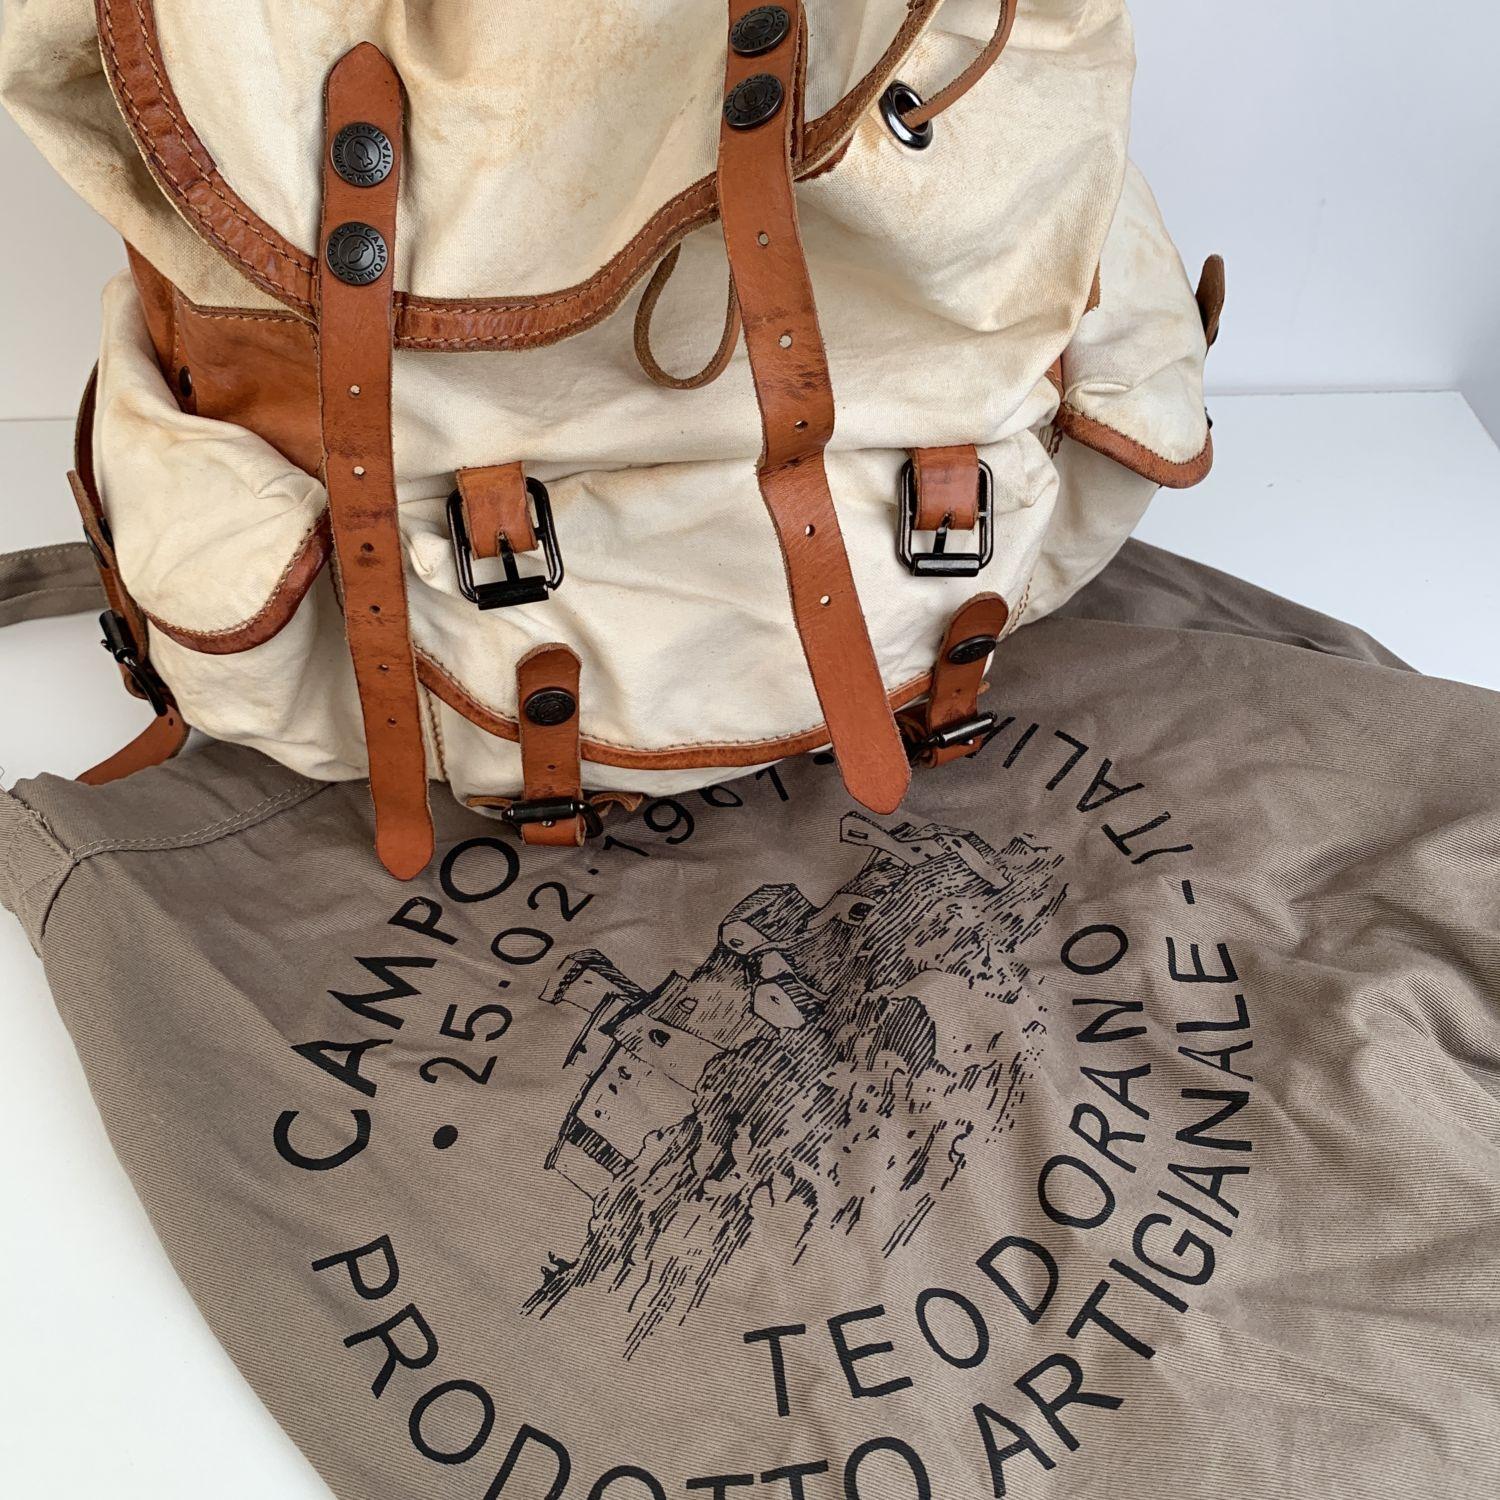 Campomaggi military style backpack crafted in ivory cotton canvas and trimmed with tan leather. Flap with double buckle/snap straps on the front + drawstring closure on top. Snap/buckle flap pocket on the front and snap/buckle flap pockets on the